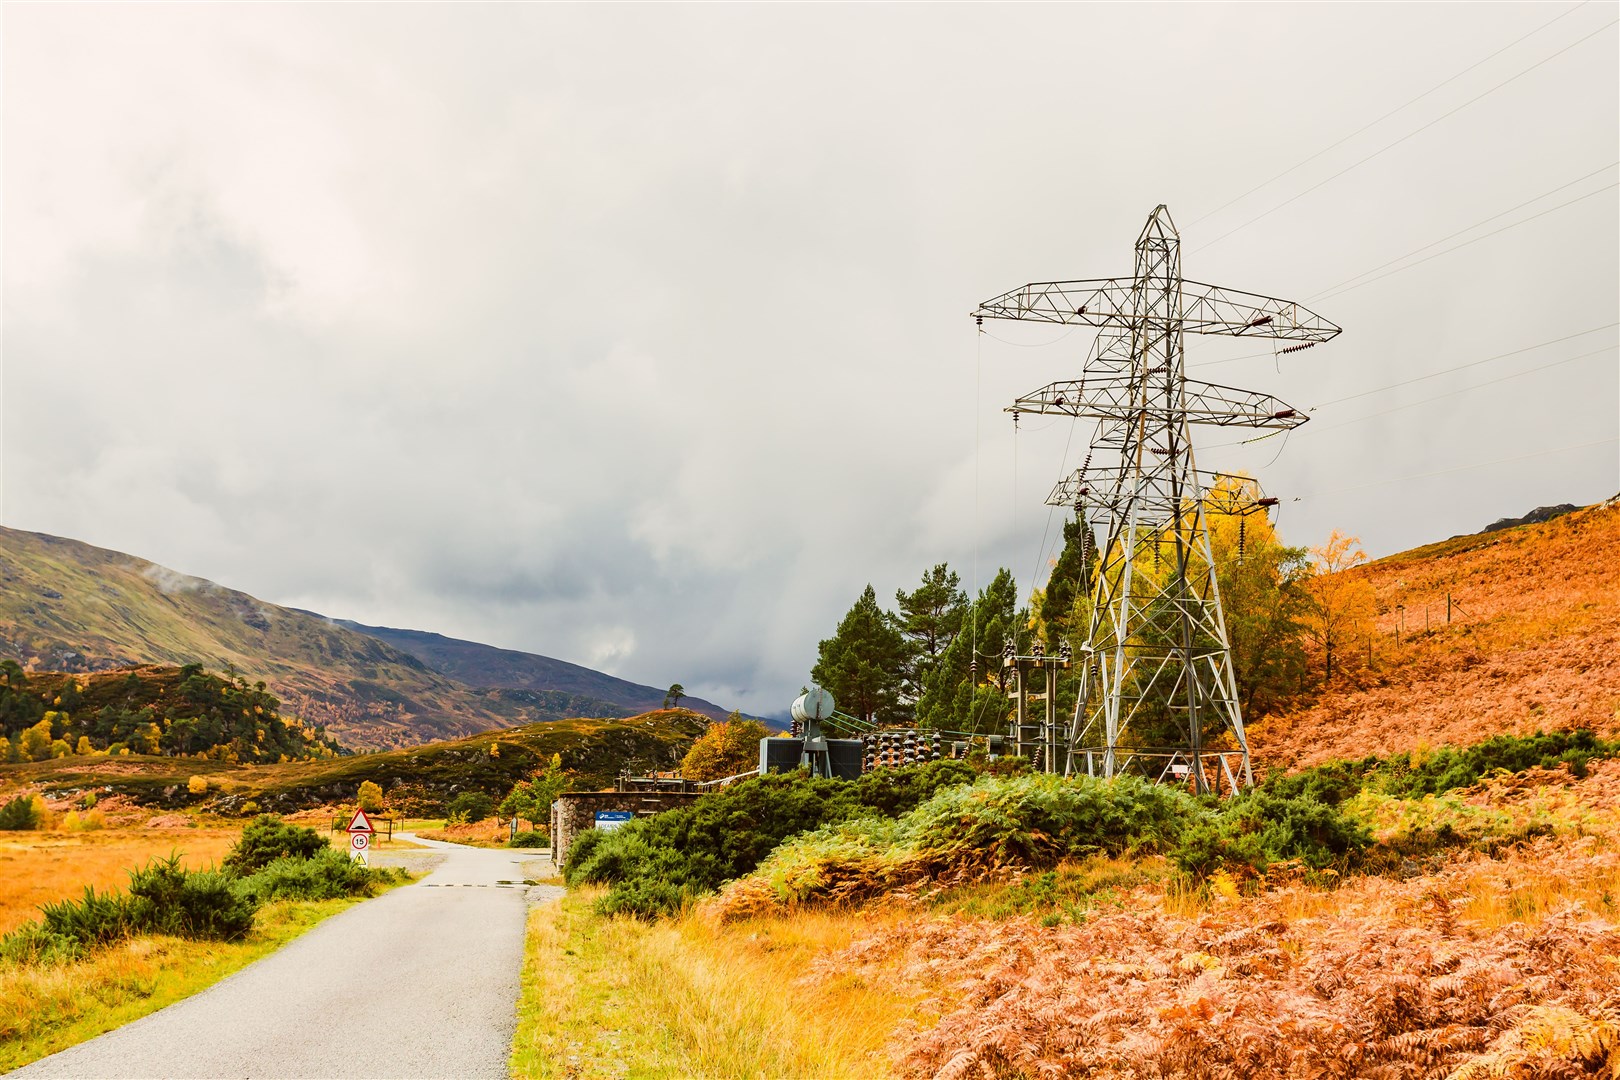 Deanie Power Station in the remote Glen Strathfarrar in the Scottish Highlands with pylon and power lines. Autumn with golden ferns. Copy space. Horizontal.